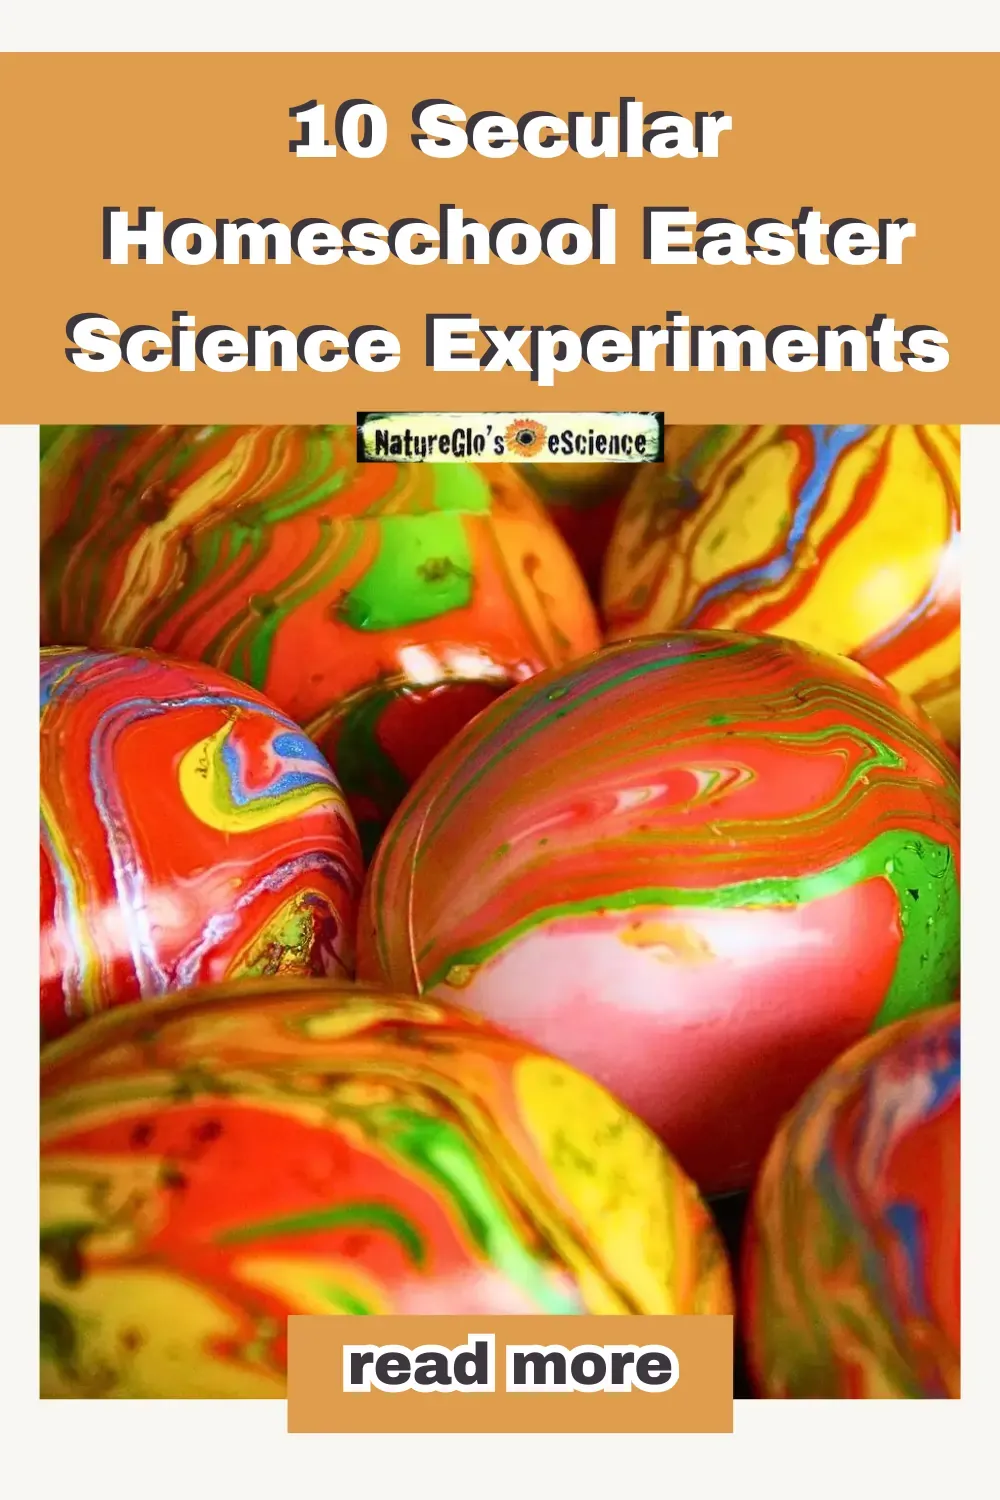 10 Secular Homeschool Easter Science Experiments